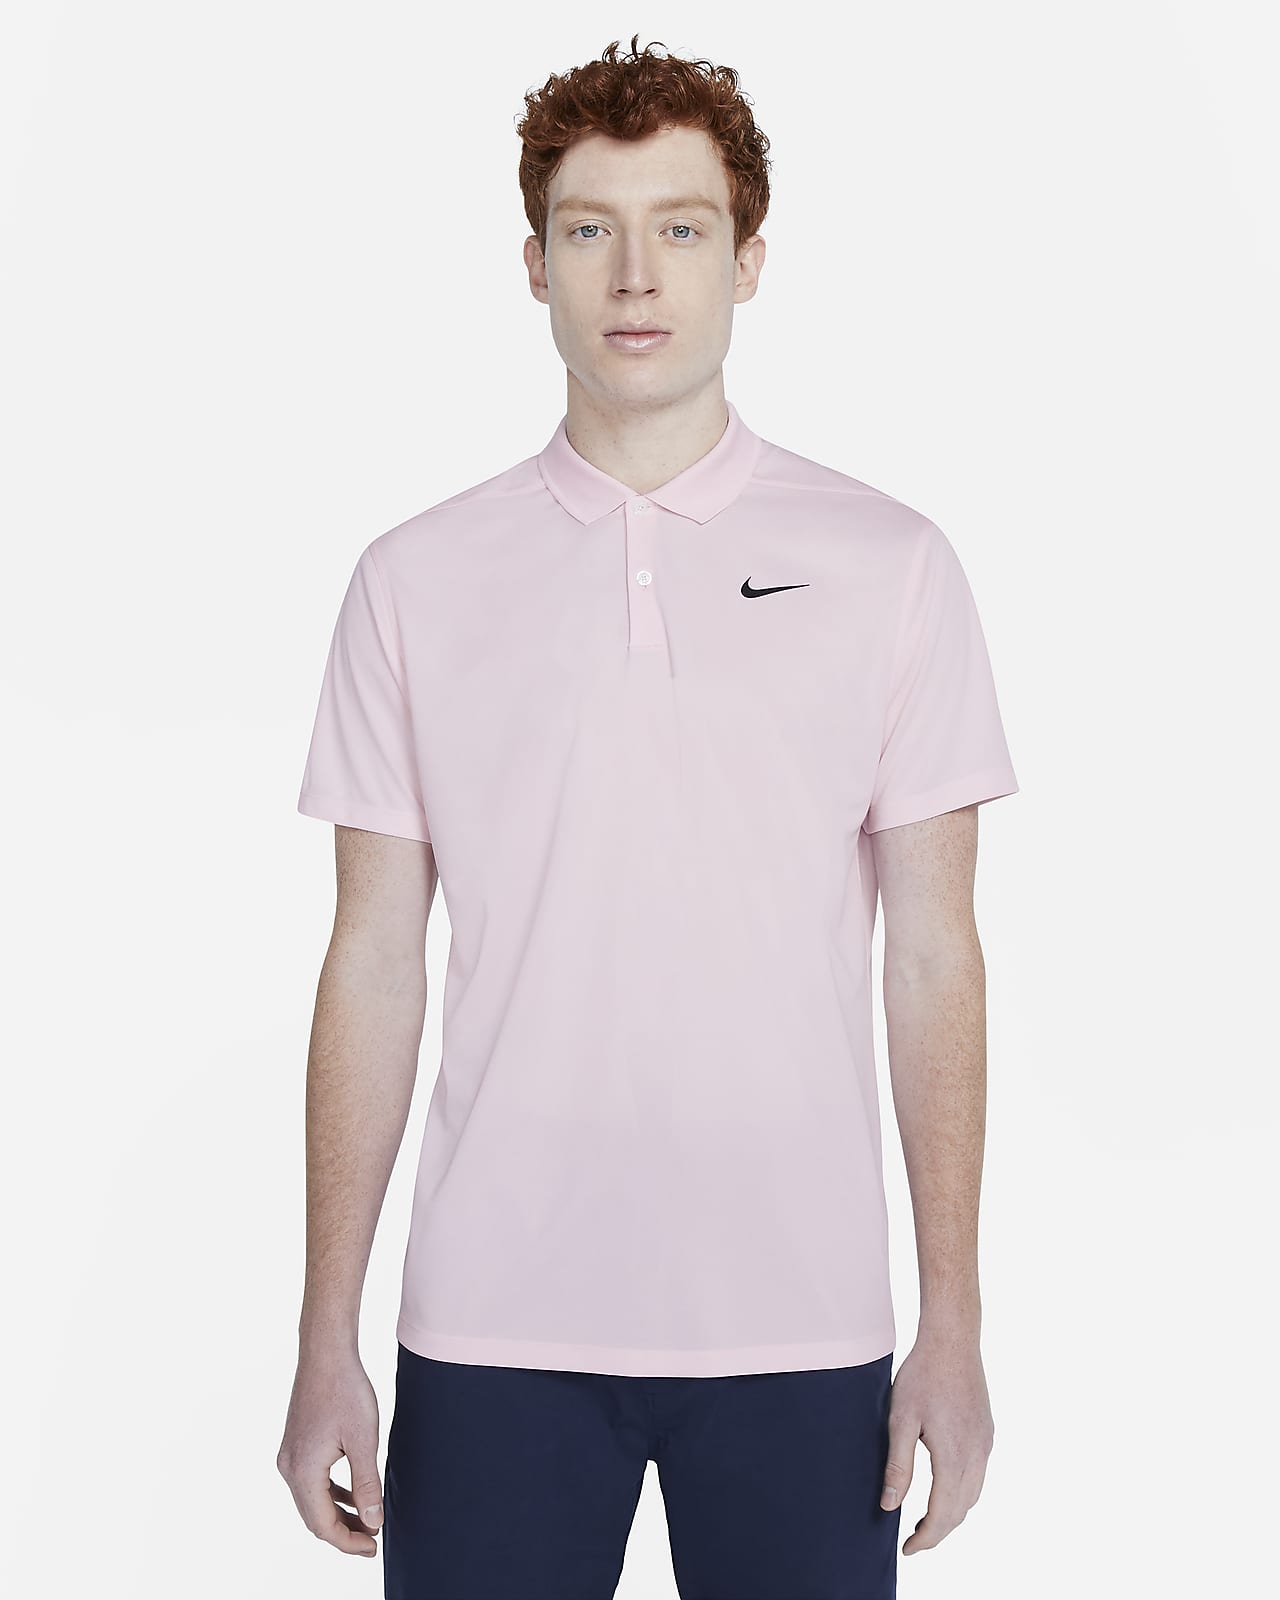 tiger woods pink and white golf shirt